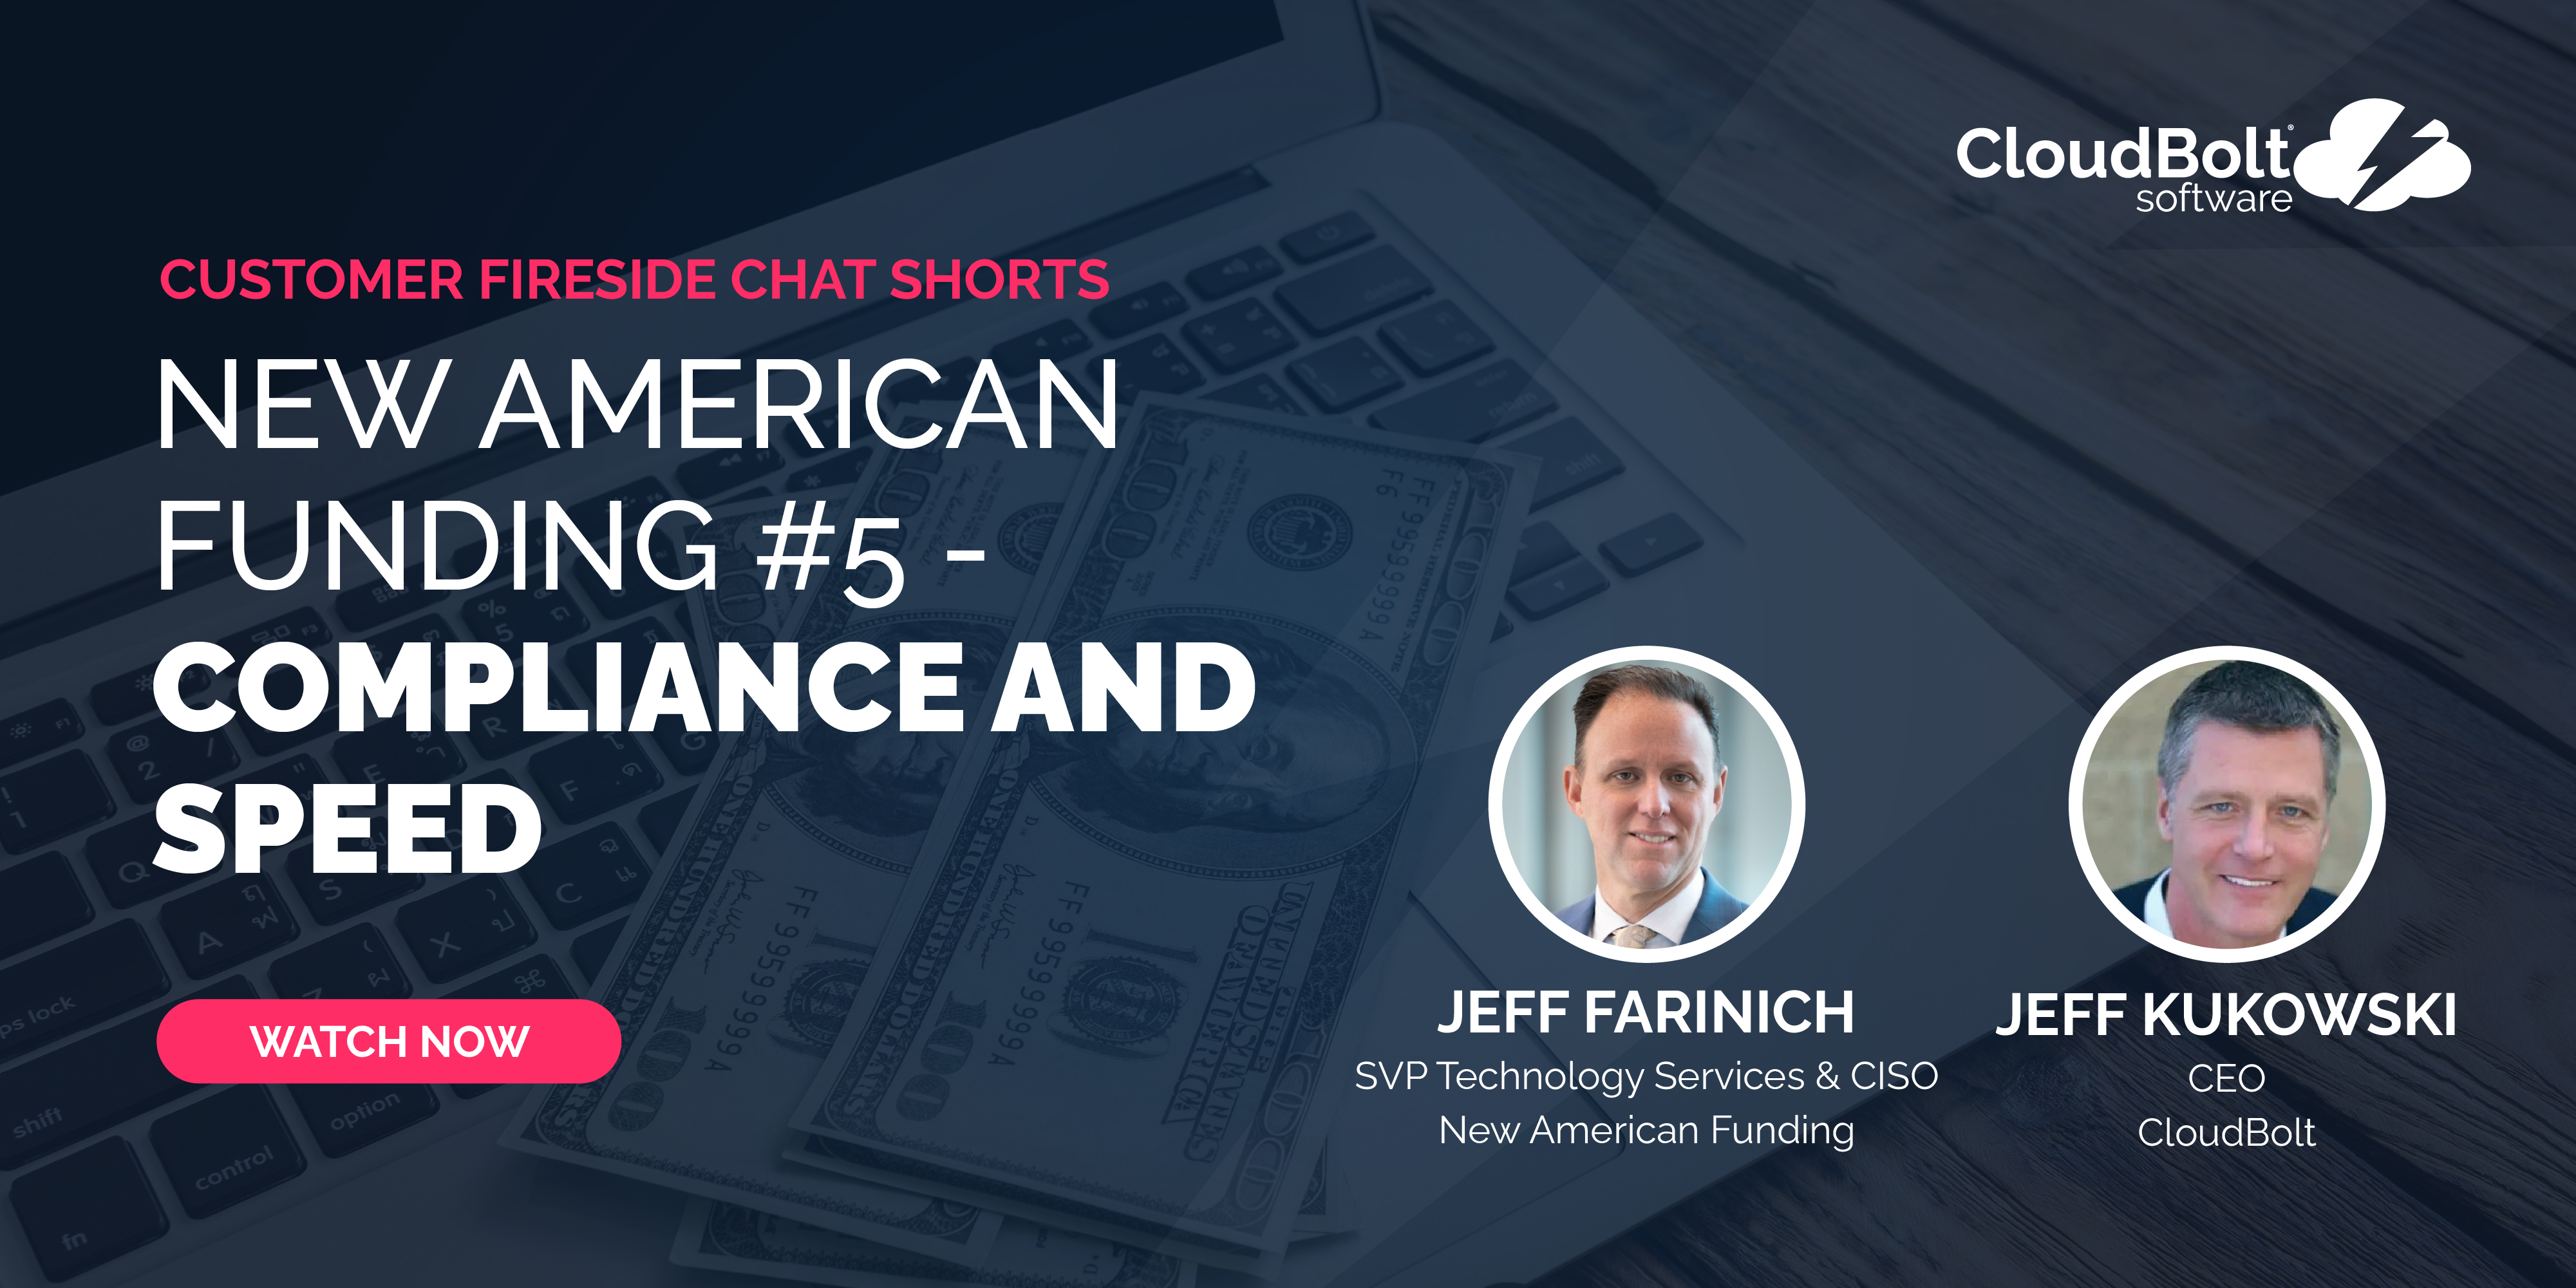 New American Funding #5—Compliance and Speed